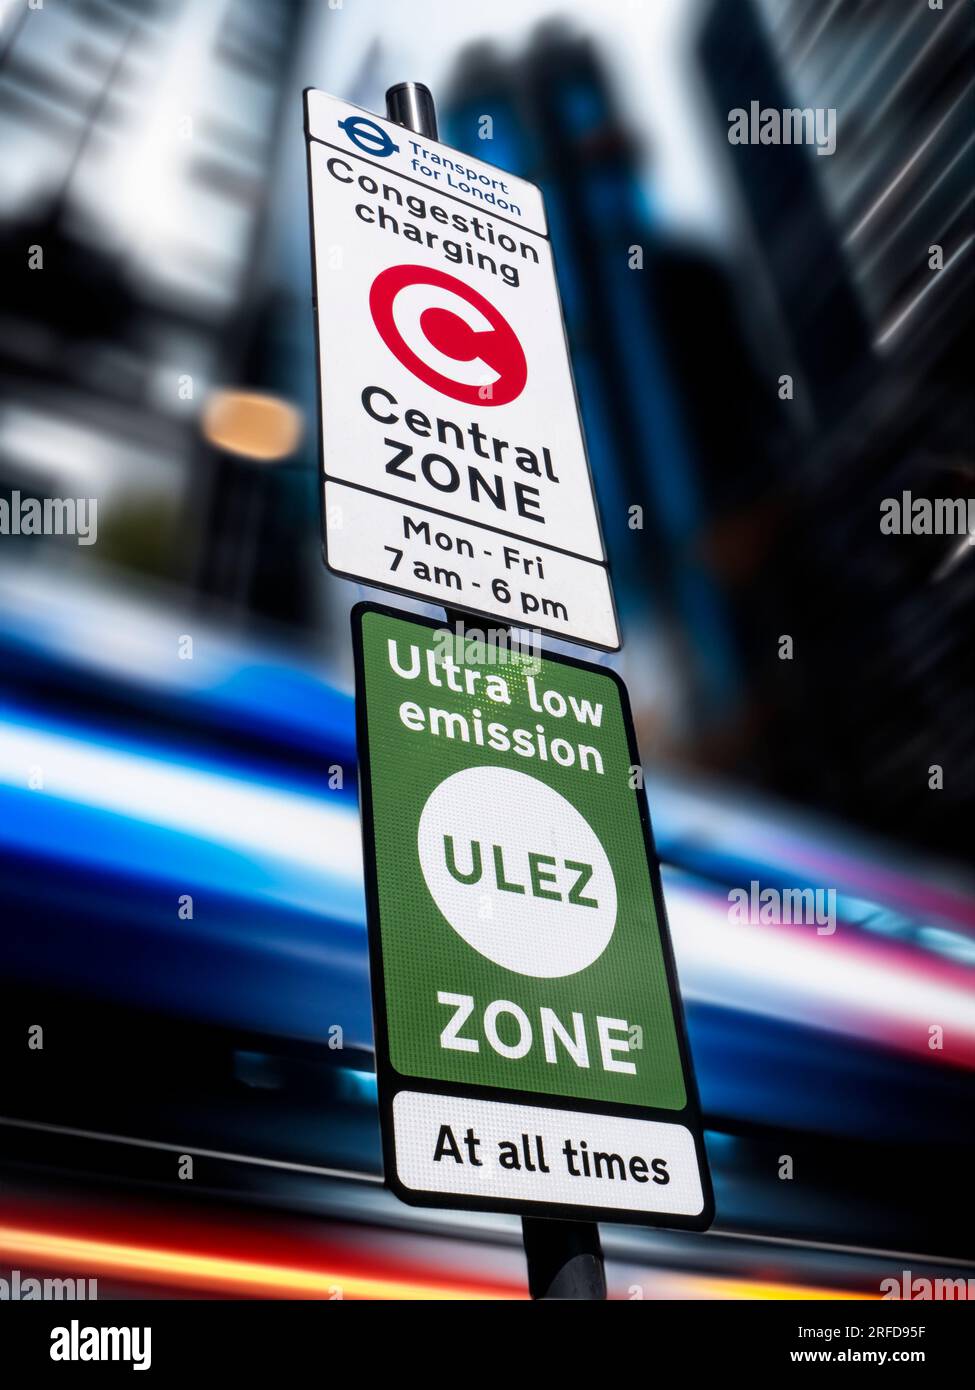 'ULEZ' ZONE SIGN SIGNAGE TFL  London area city town background Congestion/Emission charging London zone sign with 'ULEZ' ultra low emission zone sign against blurred traffic and city buildings London UK Stock Photo